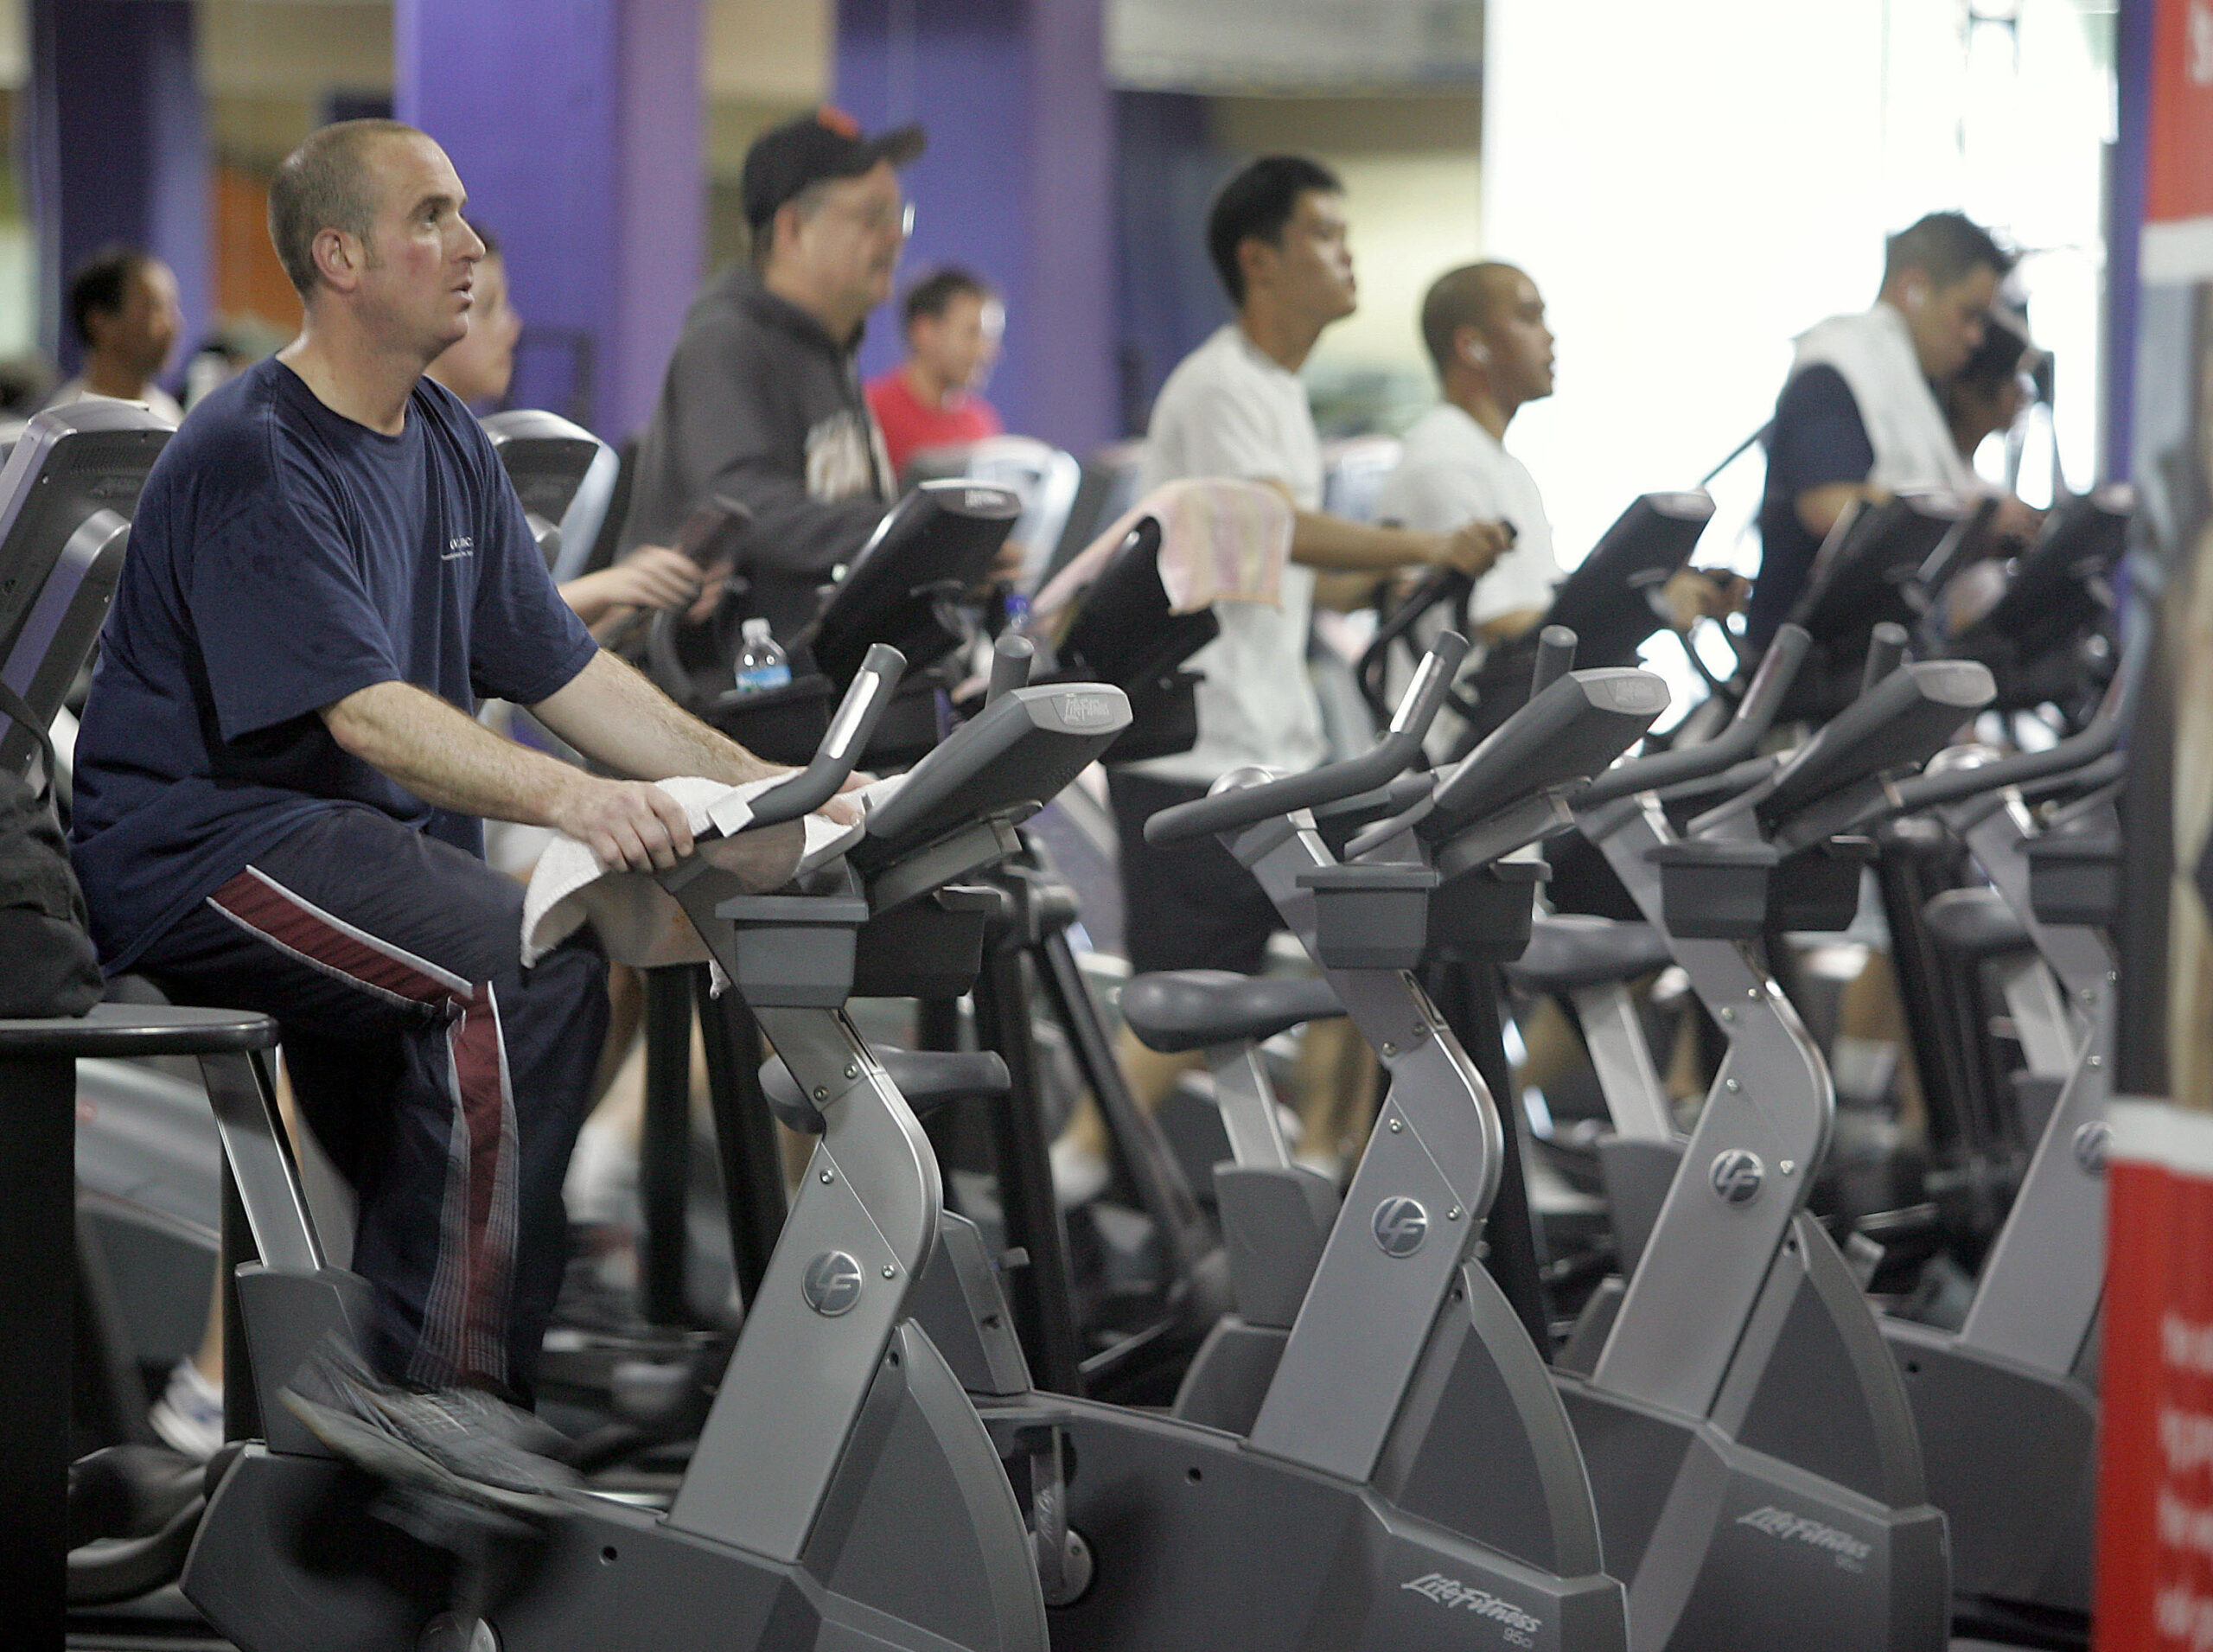 People on exercise bikes and treadmills